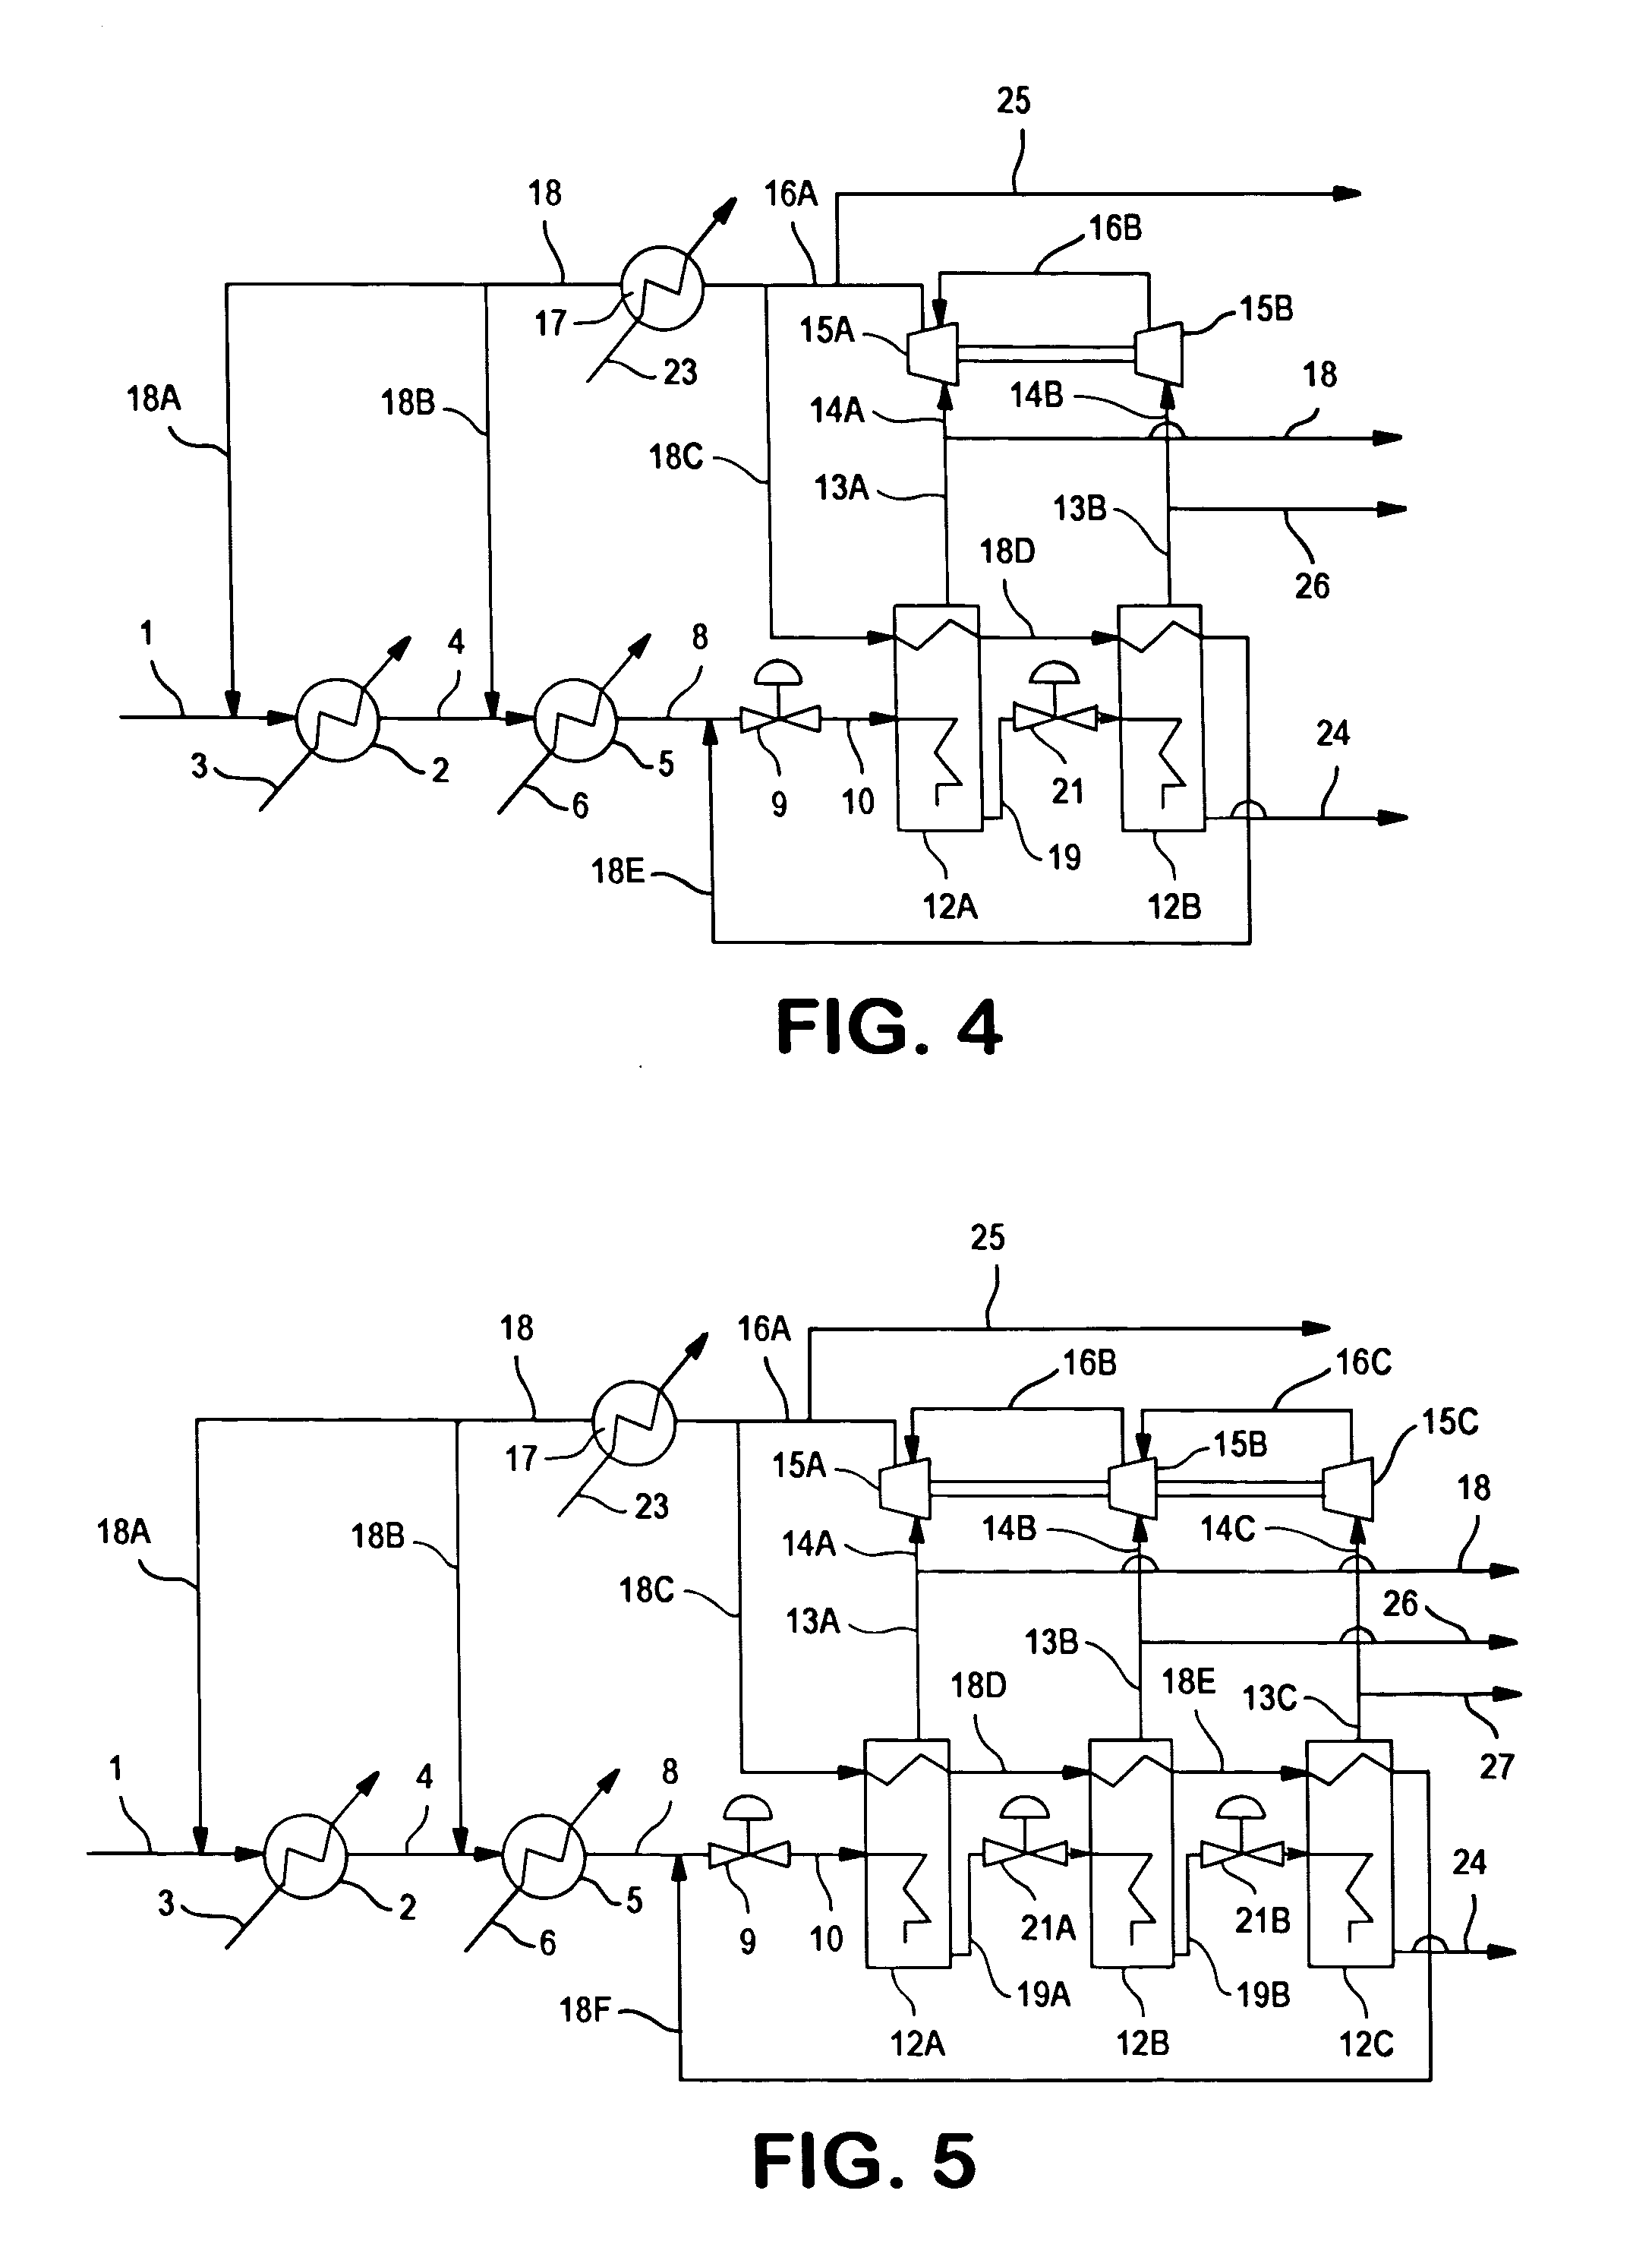 Integrated processing of natural gas into liquid products